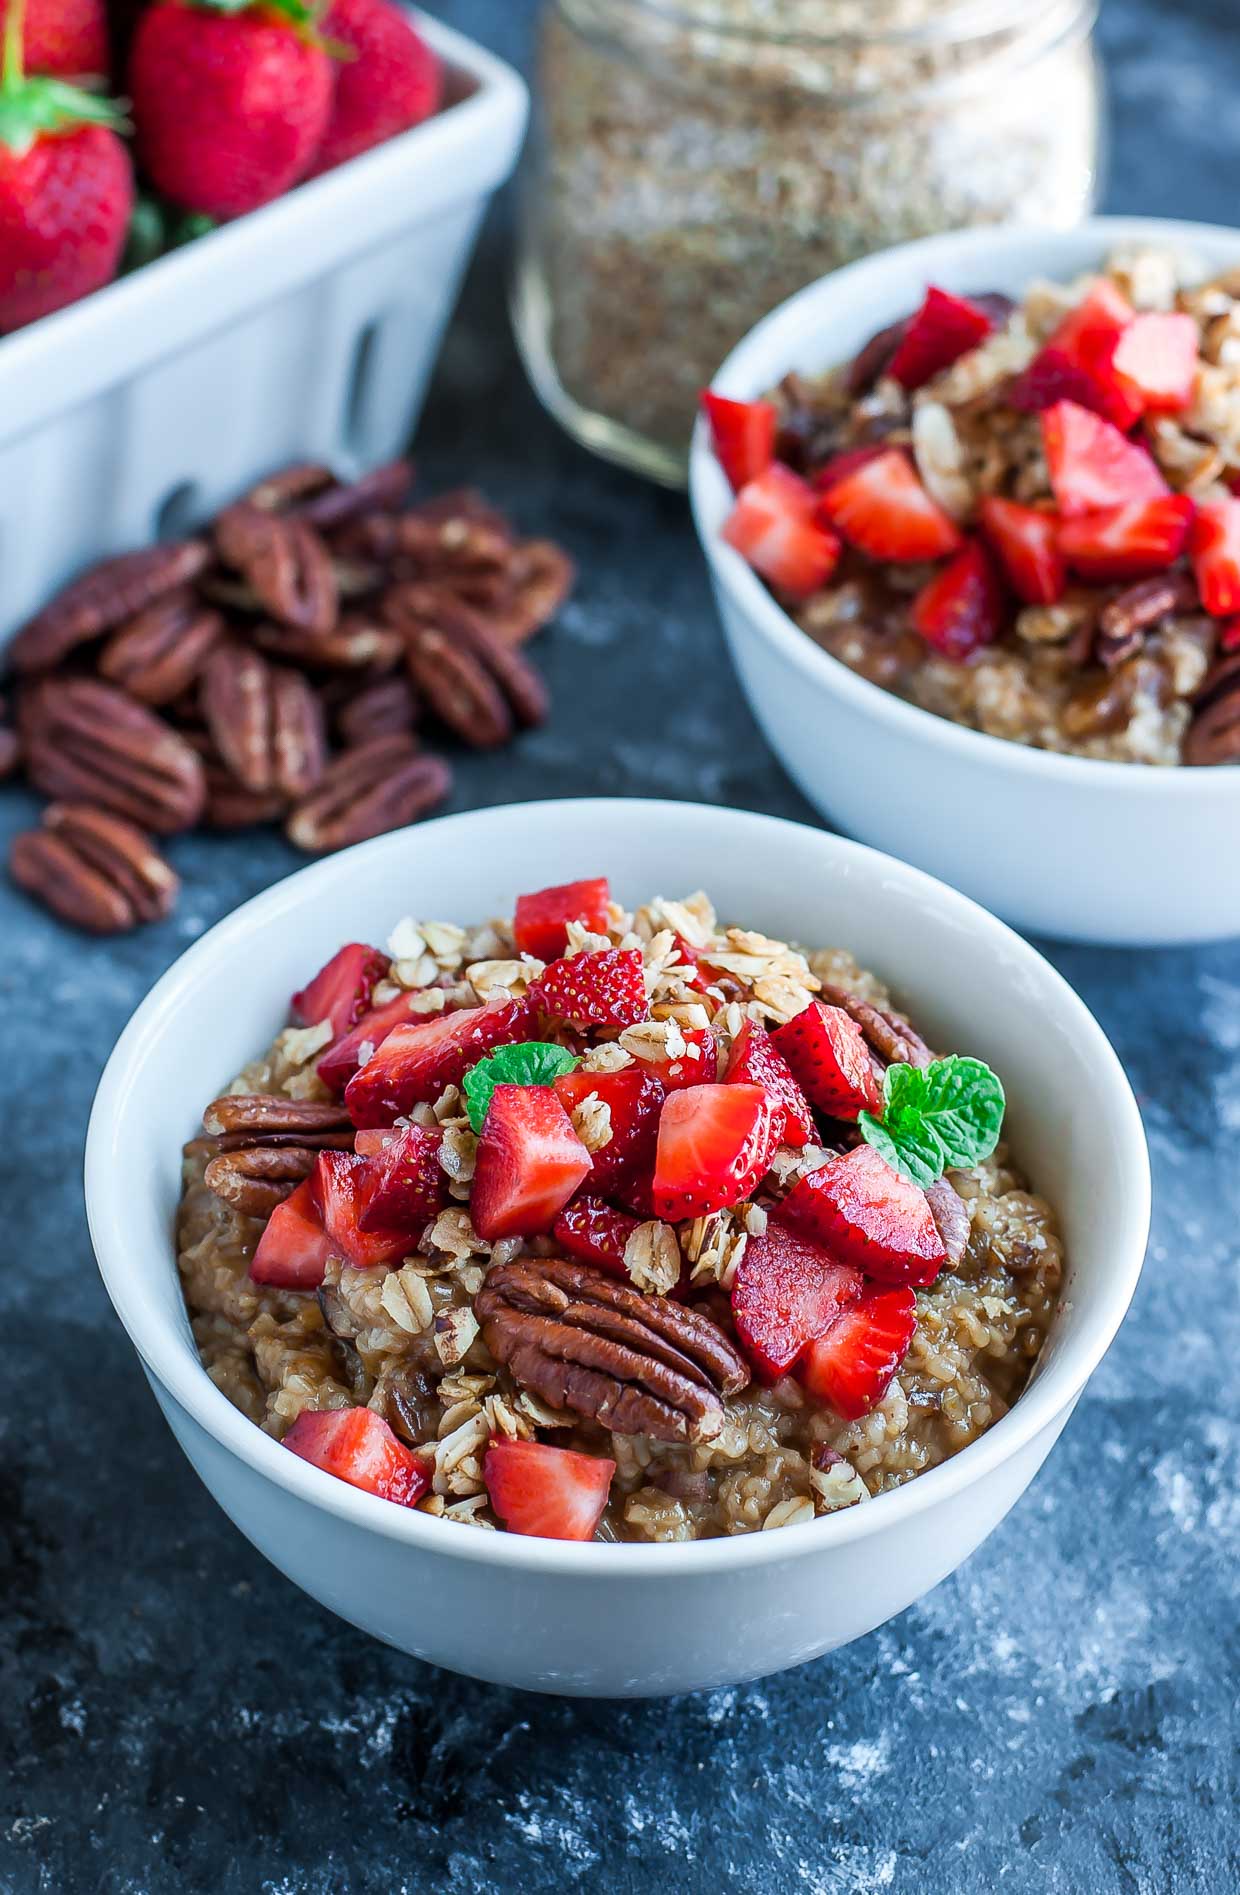 This tasty Instant Pot Strawberry Trail Mix Oatmeal is naturally sweetened and swirled with dried fruit and nuts for a healthy + speedy breakfast that's a breeze to make!